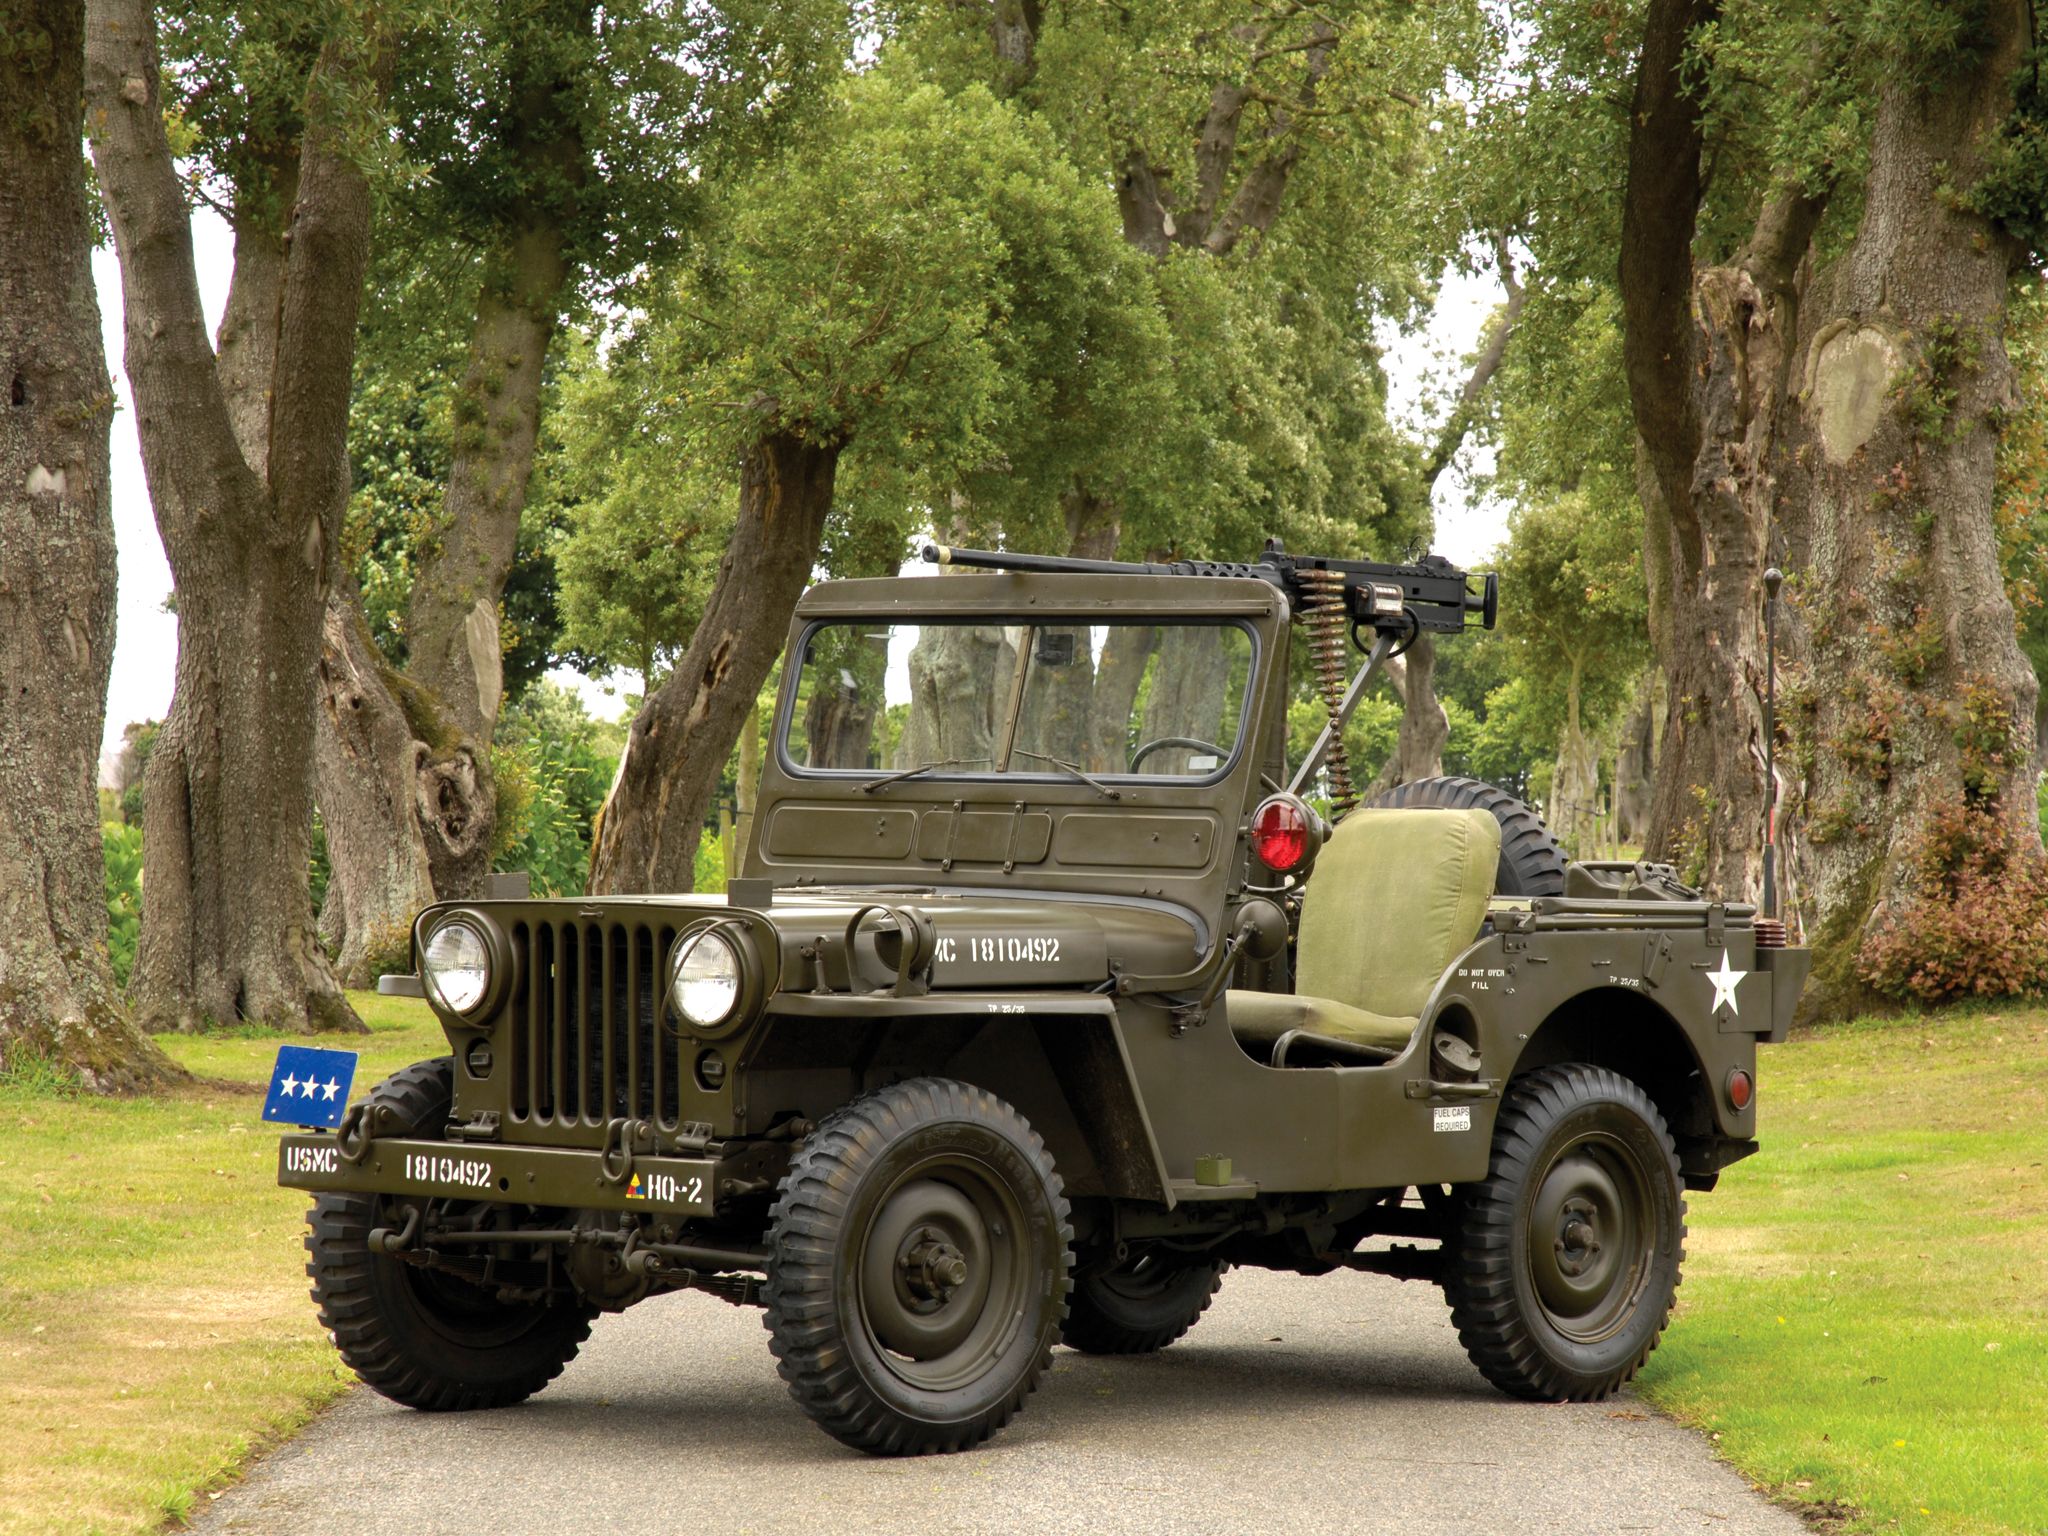 Willys, M Jeep, Truck, Trucks, Military, Retro, Weapon, Weapons, Gun, Guns Wallpaper HD / Desktop and Mobile Background